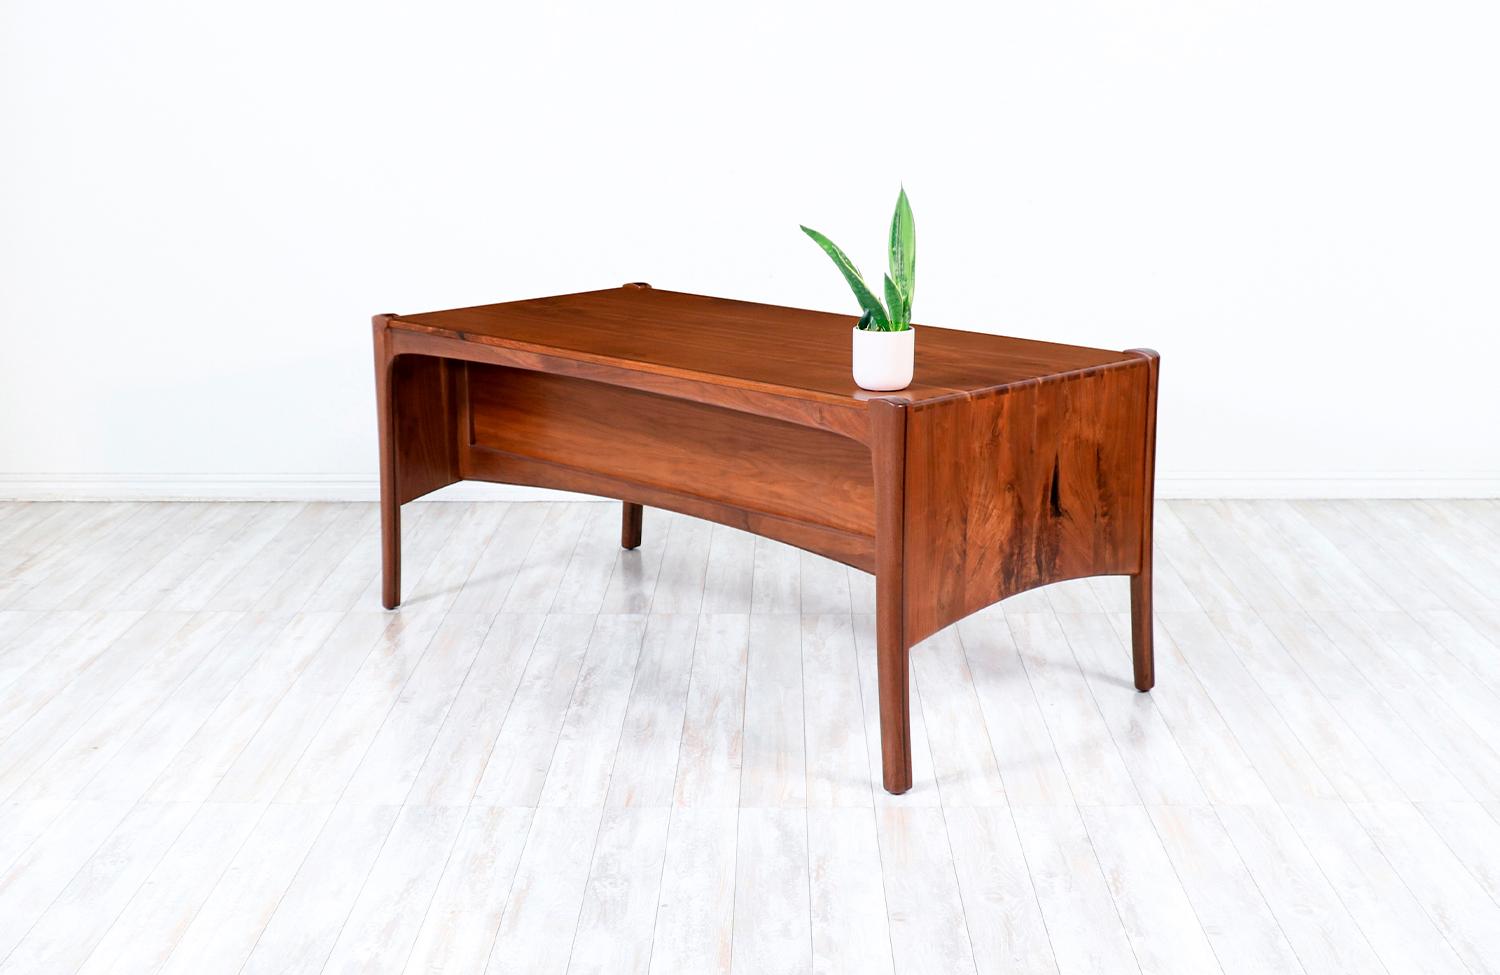 California Studio Sculpted Walnut Executive Desk by Anthony Khan In Excellent Condition For Sale In Los Angeles, CA